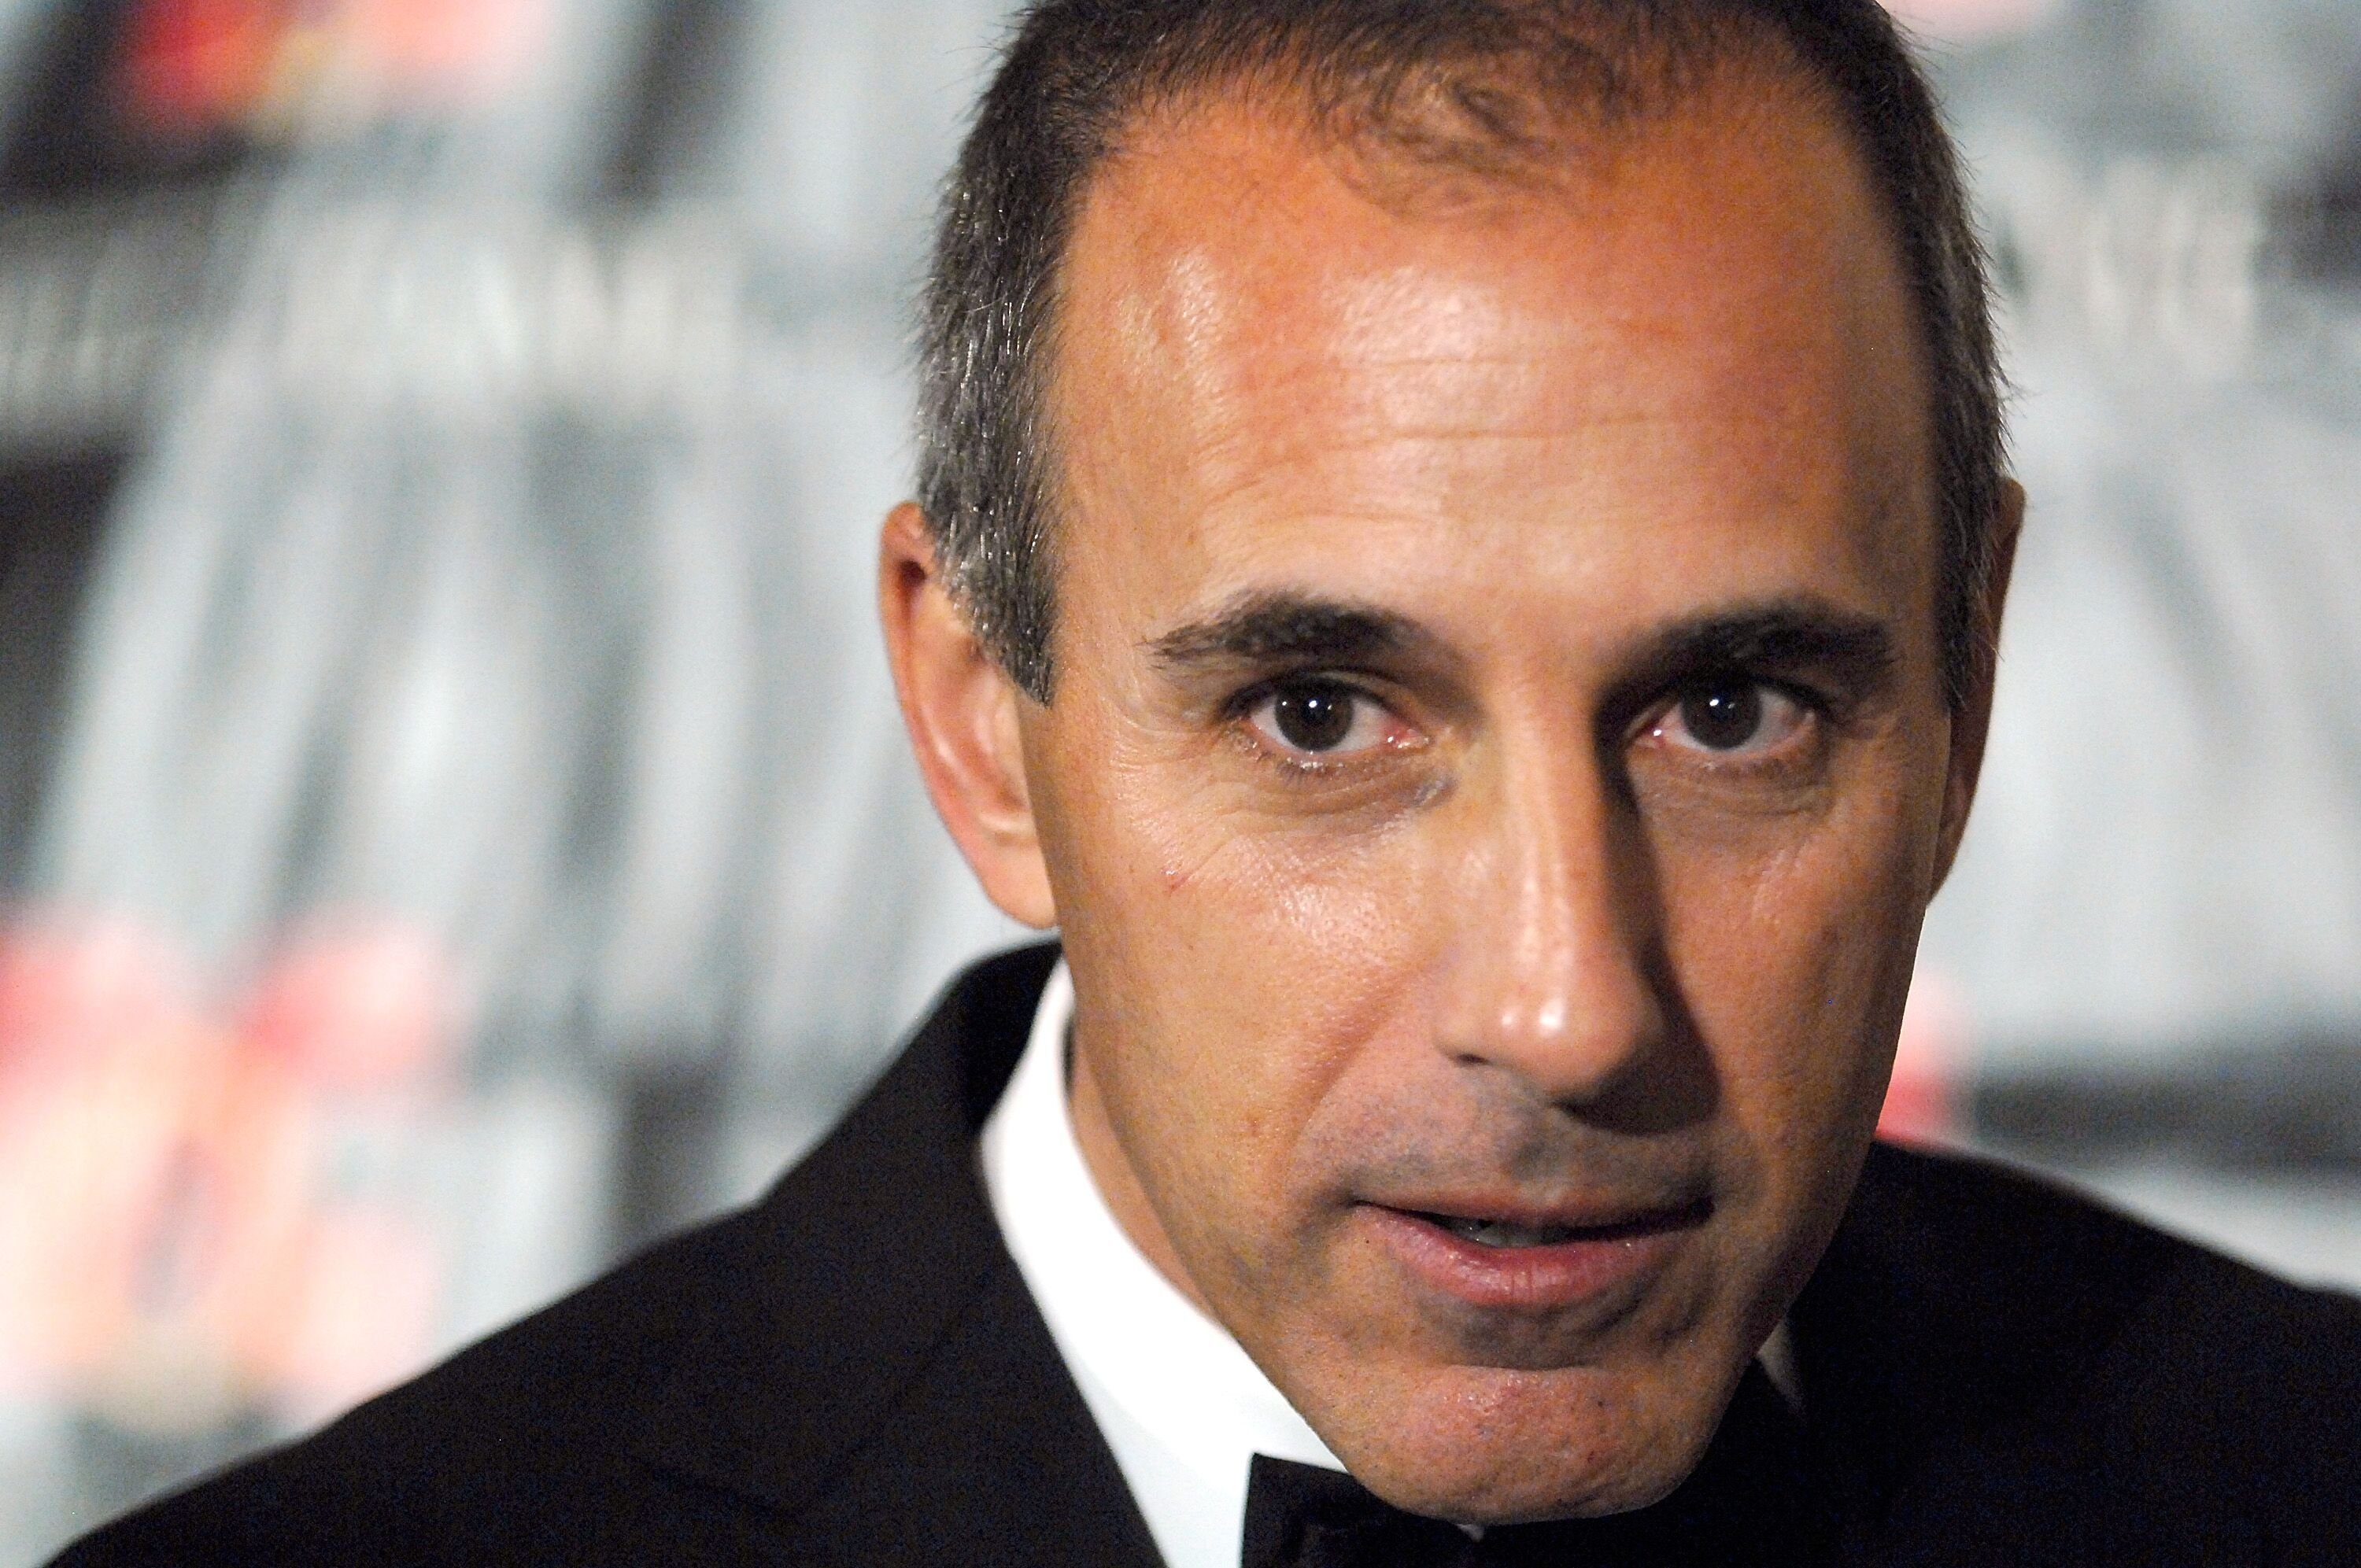 Matt Lauer at the 18th Annual Broadcasting & Cable Hall of Fame Awards on October 21, 2008, in New York City | Photo: Joe Corrigan/Getty Images